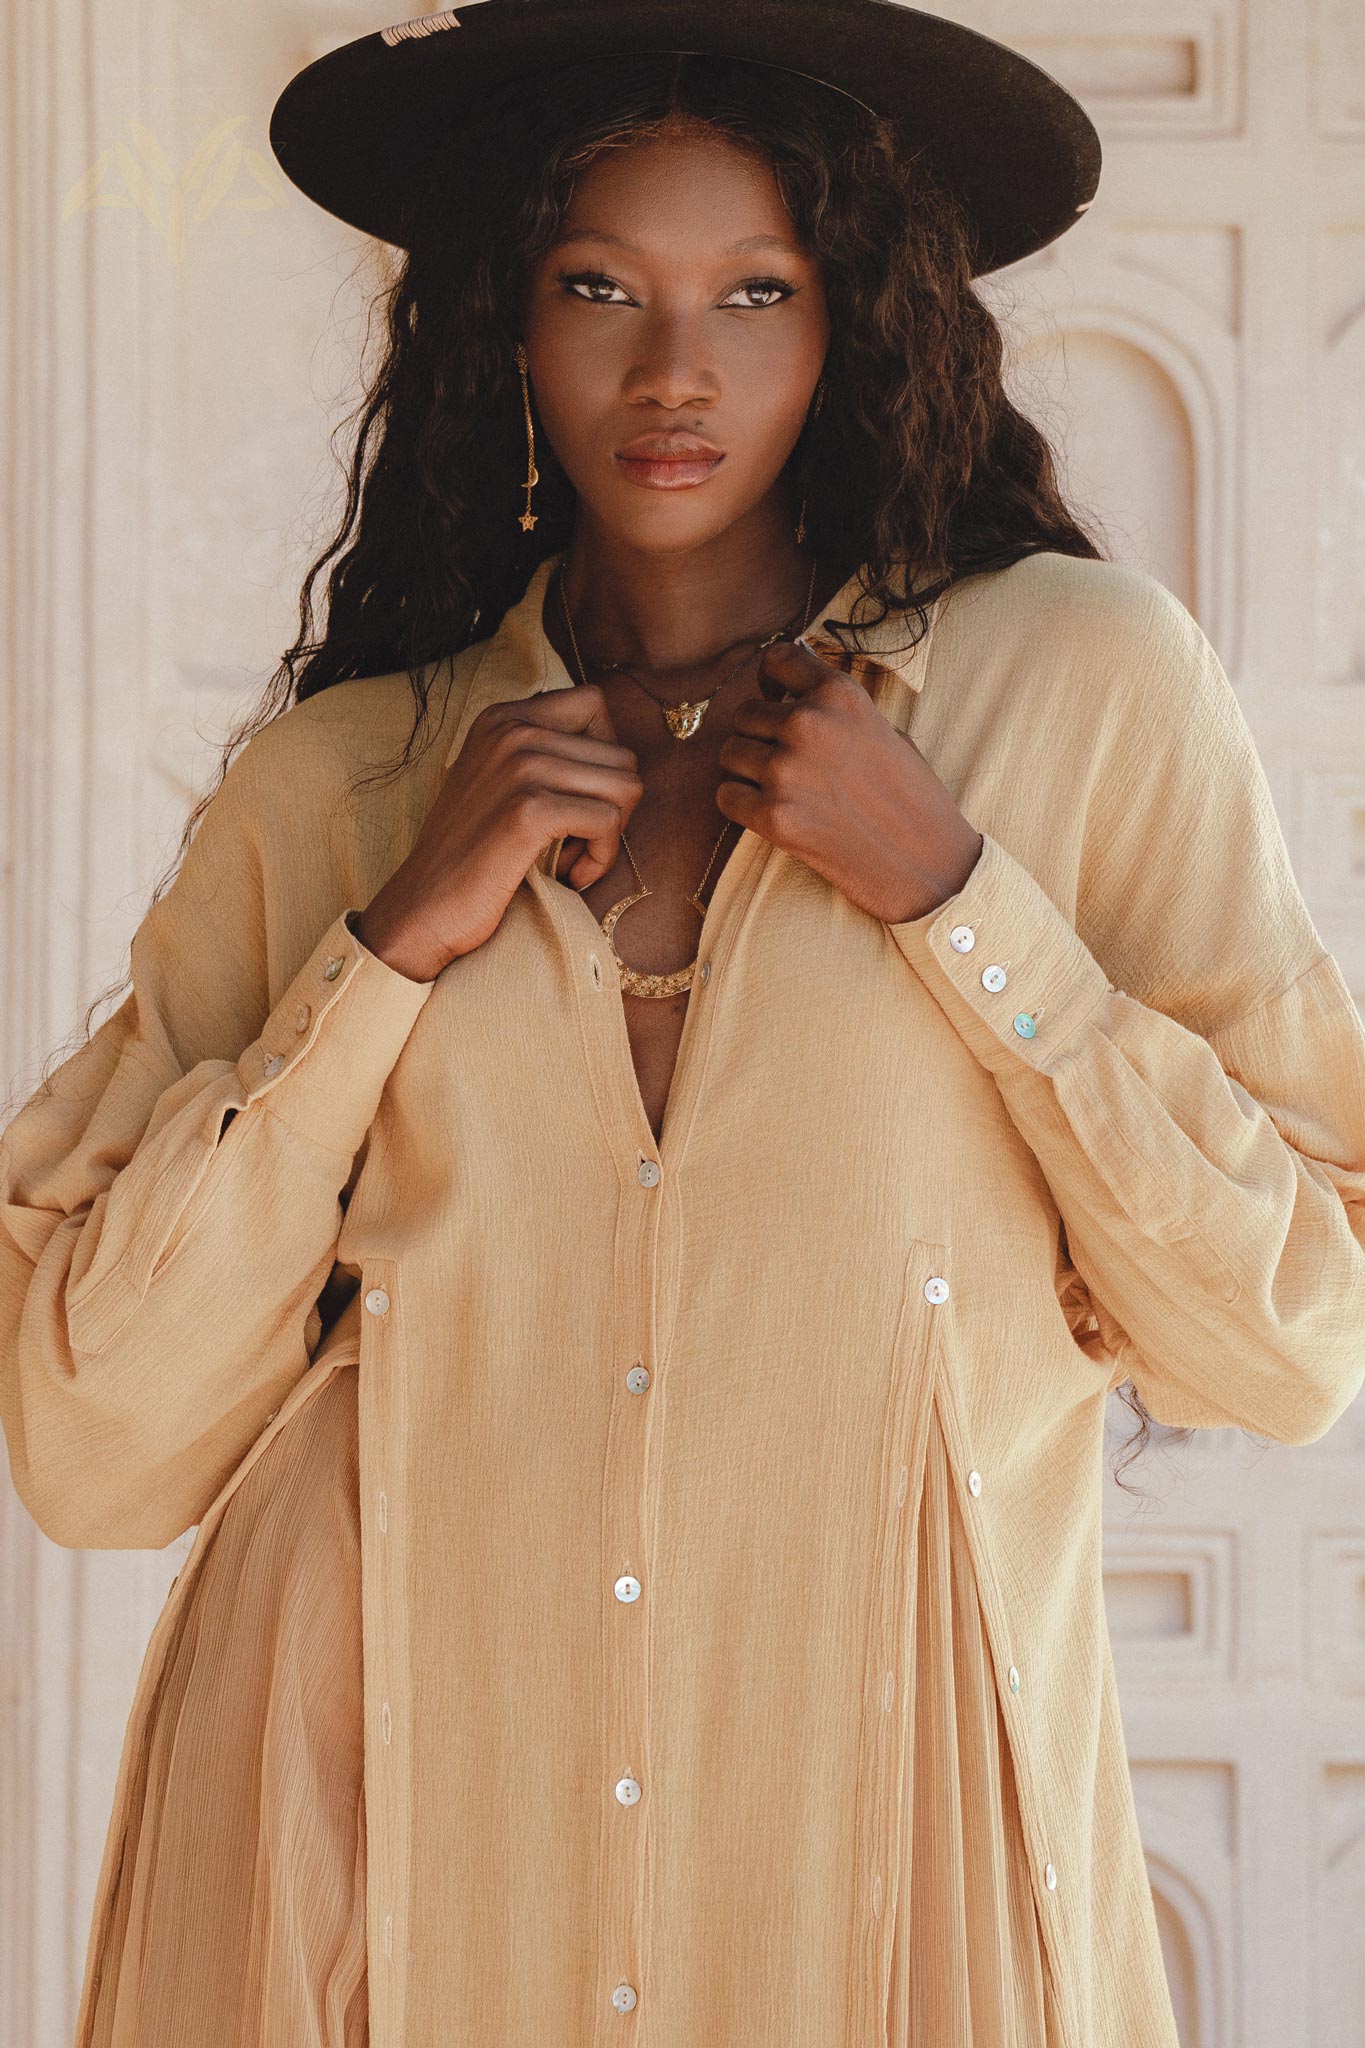  The Ochre Boho Shirt Dress by Aya Sacred Wear is perfect for any occasion